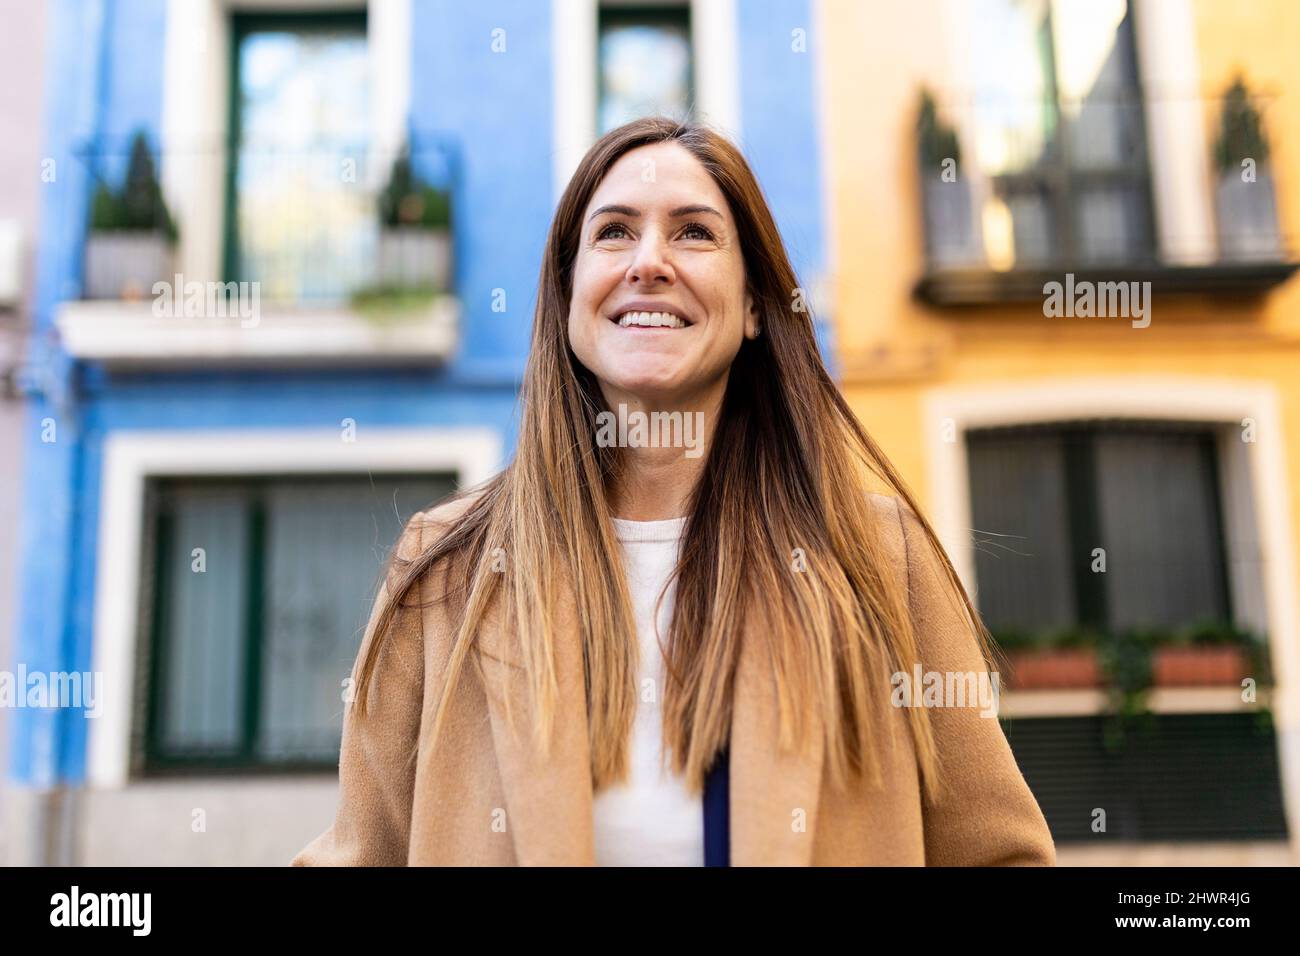 Smiling woman with long brown hair in city Stock Photo